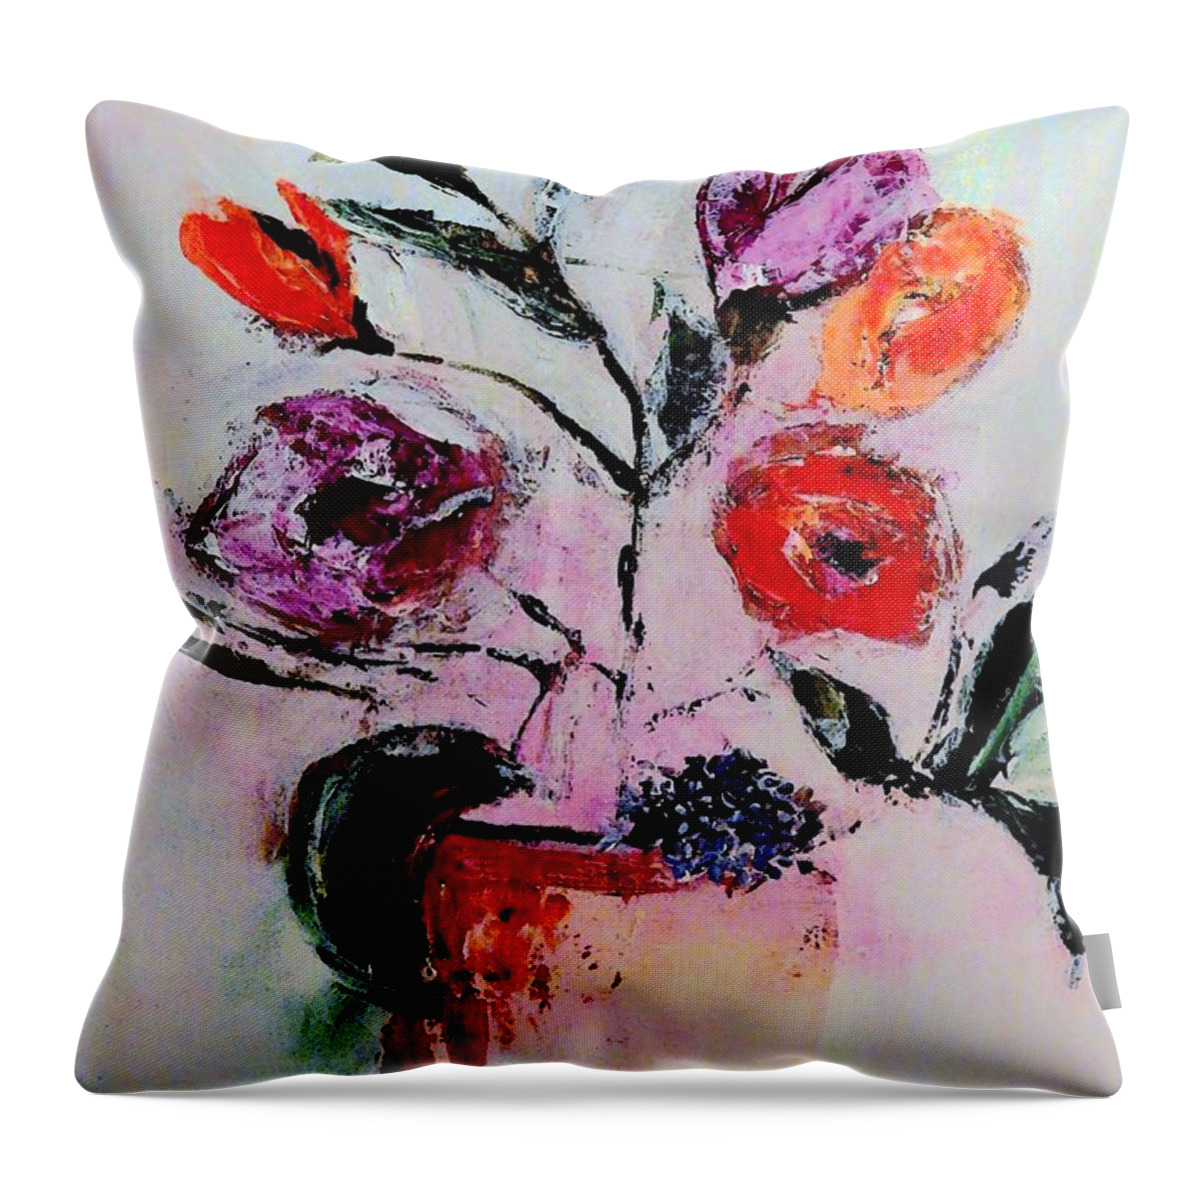 Pot Throw Pillow featuring the painting Pottery Plants by Lisa Kaiser